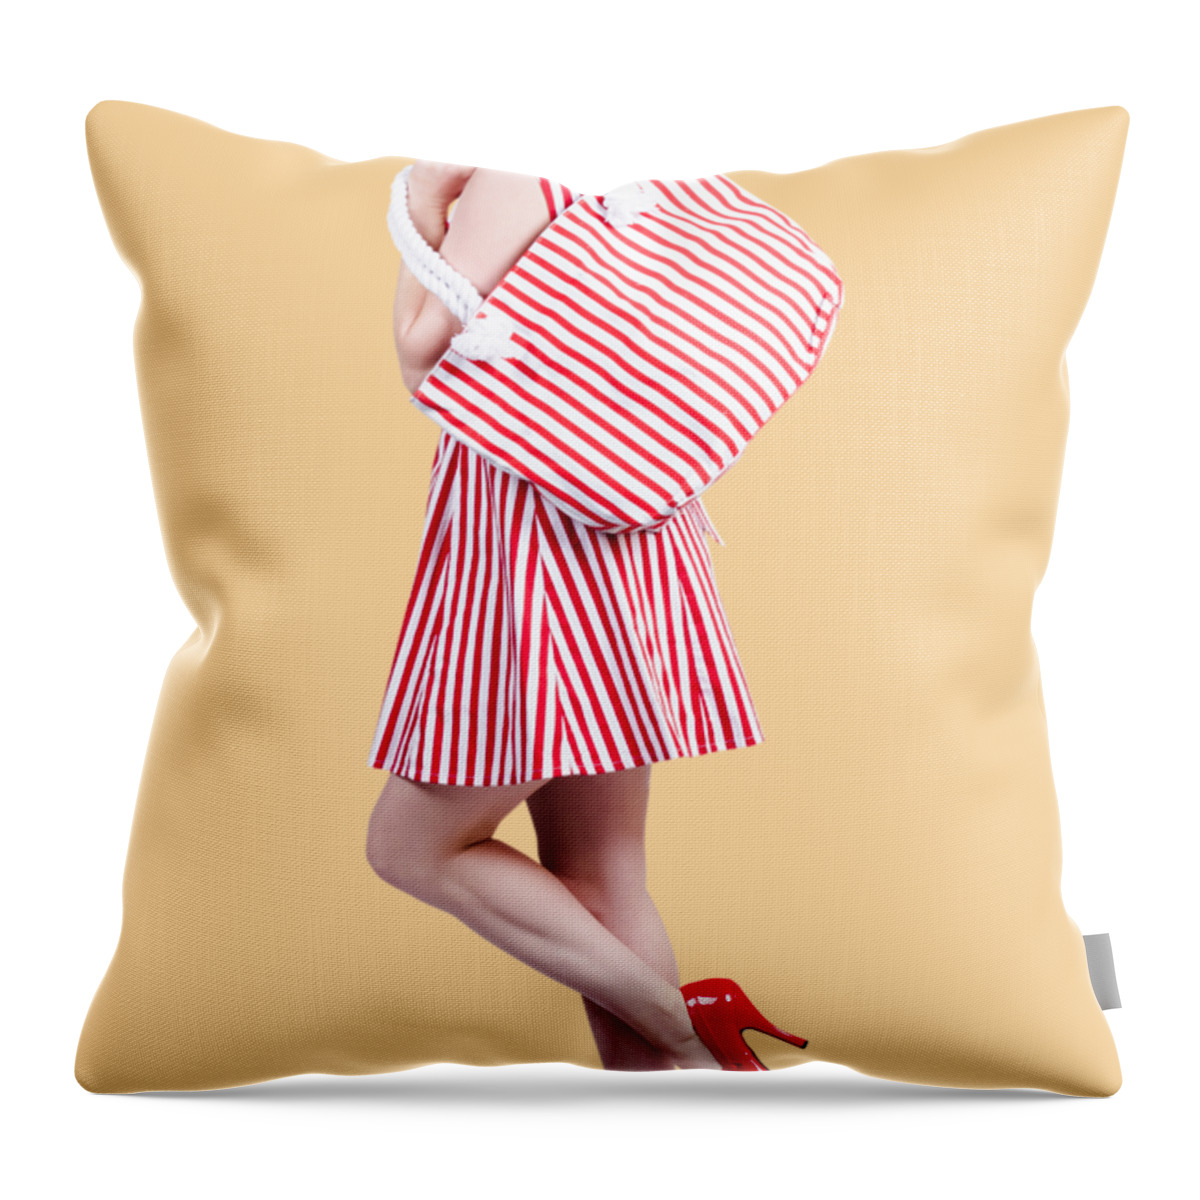 Shopper Throw Pillow featuring the photograph Pin up girl wearing stripped red dress holding bag by Jorgo Photography